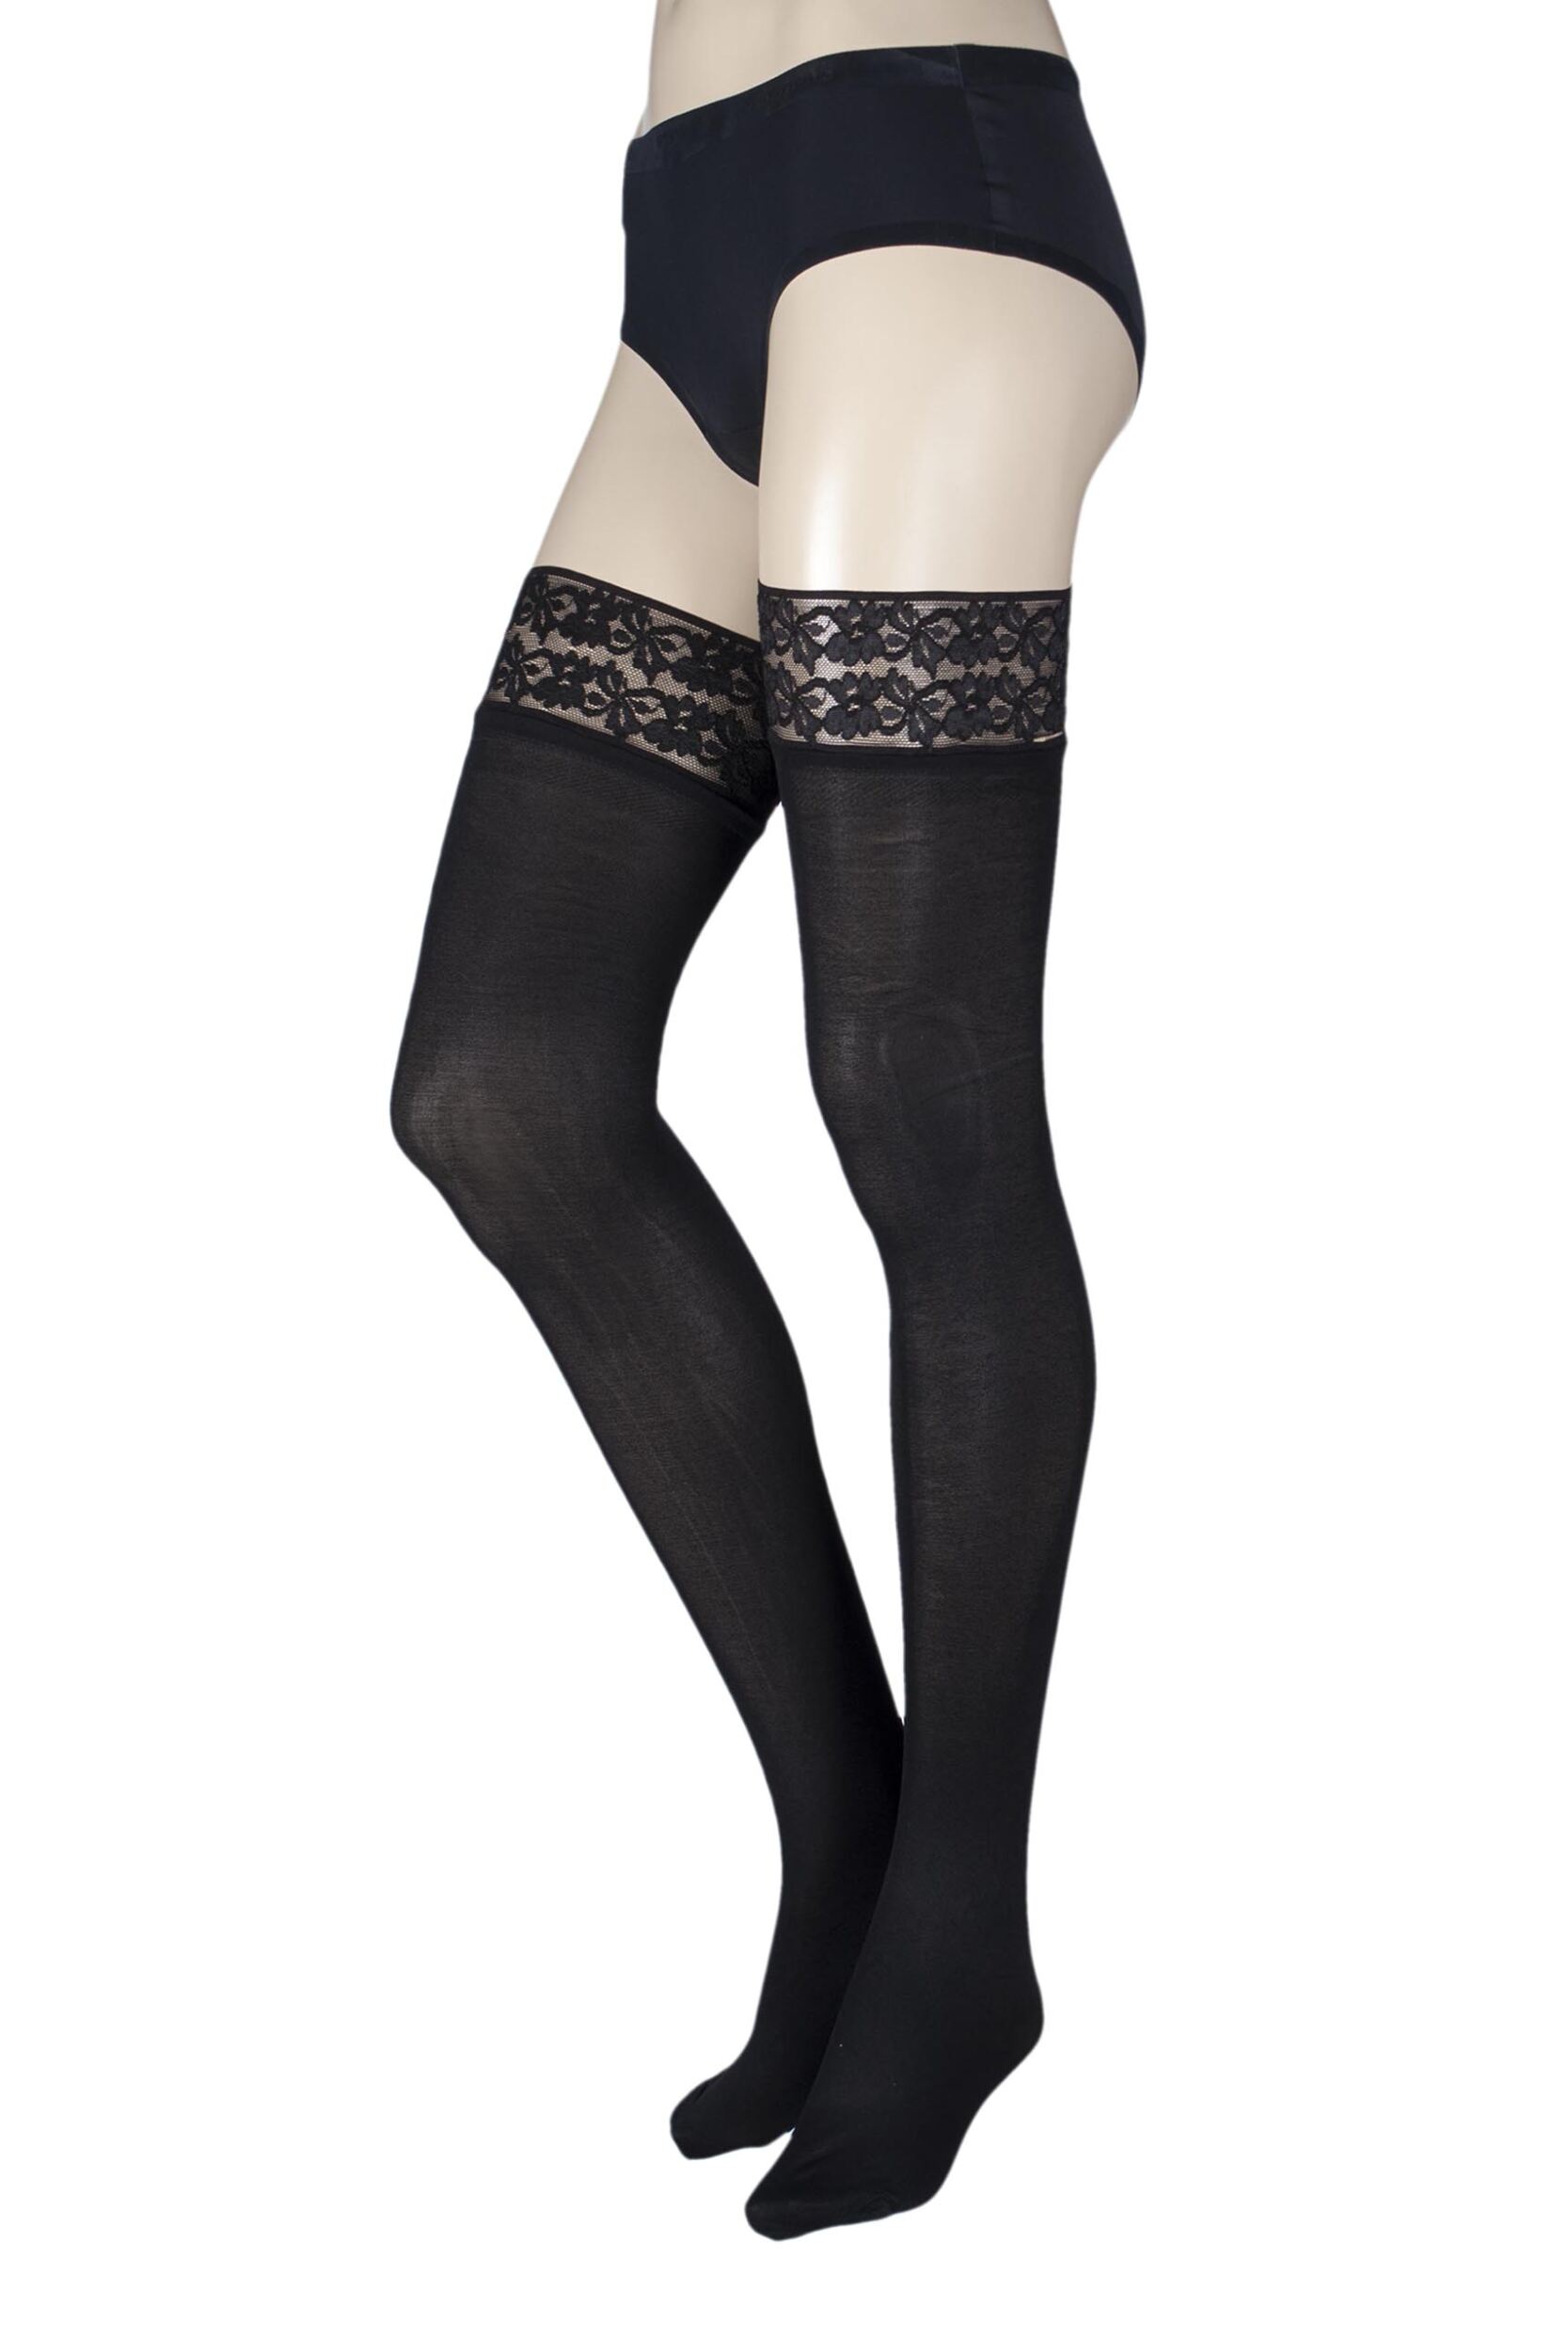 Image of Ladies 1 Pair Pretty Legs 80 Denier Lace Top Hold Ups